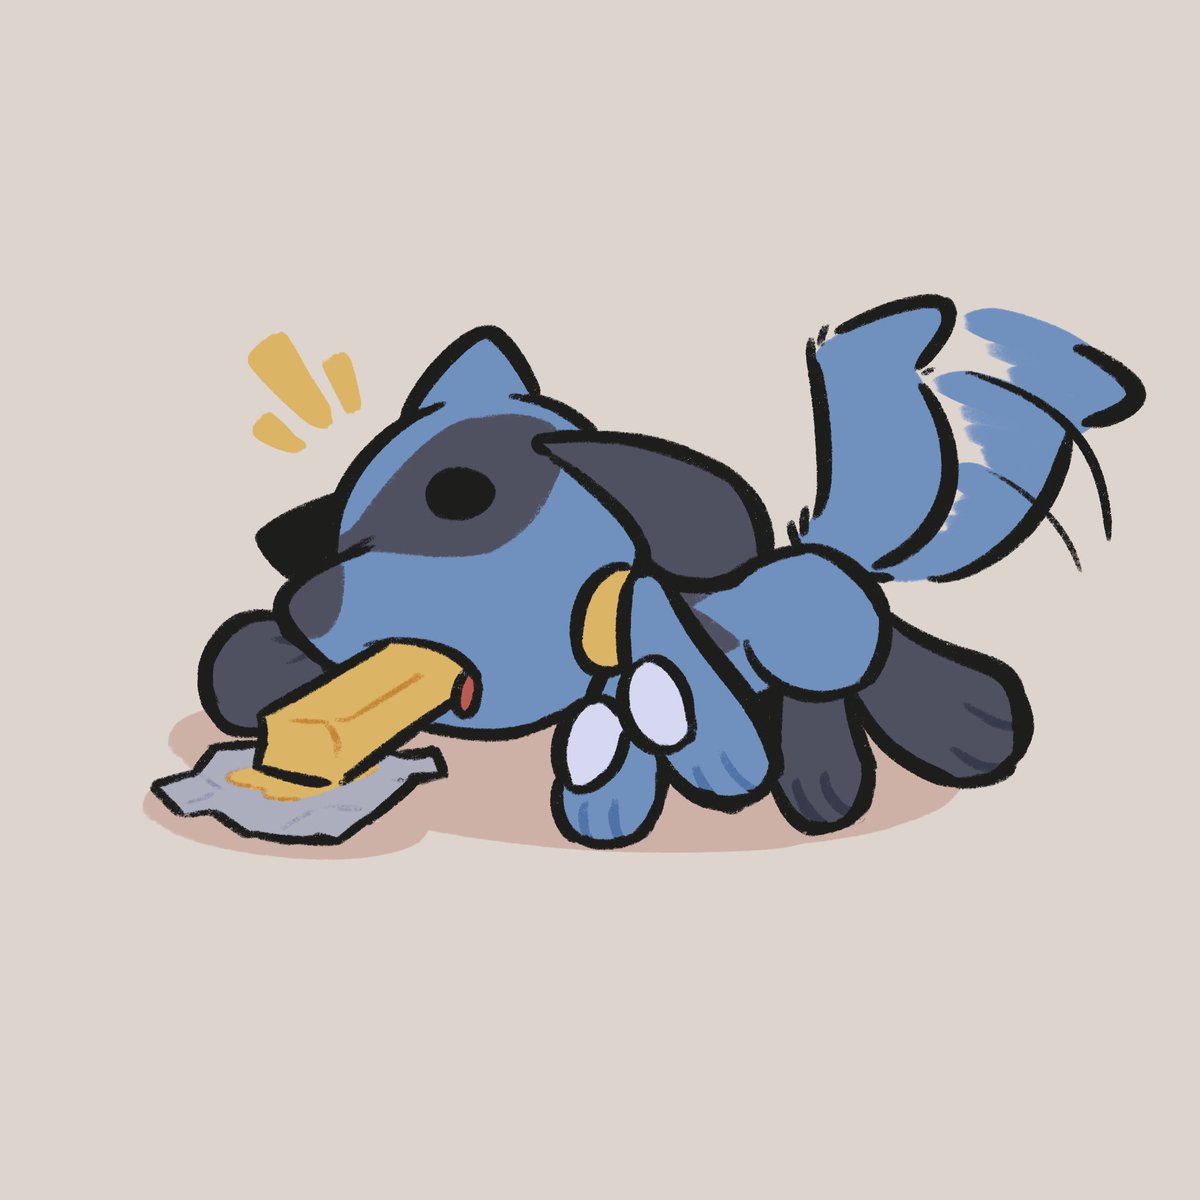 Advos On Twitter Rt Advosart Riolu Just Fuckin Ate An Entire Stick Of Butter 